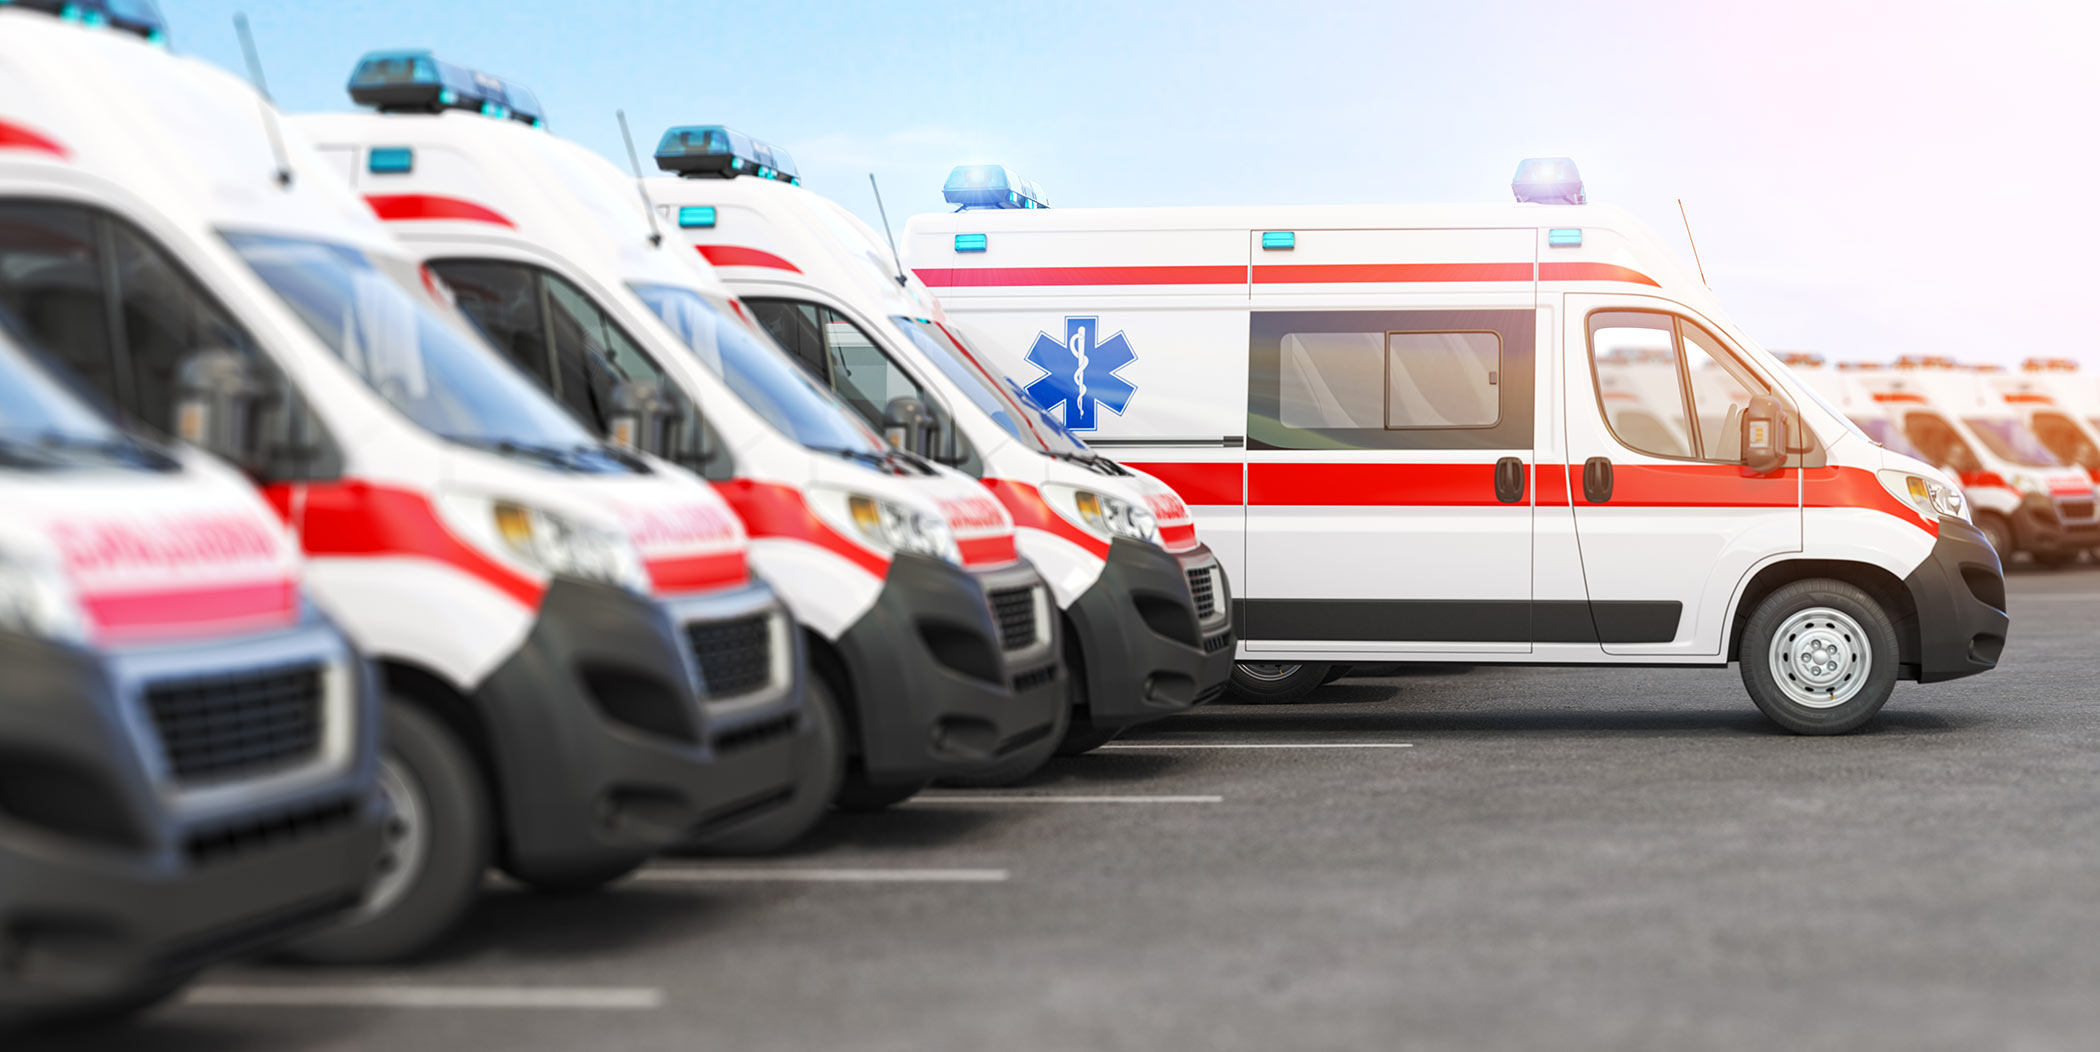 Ready for Anything: Emergency Medical Services (EMS) and Infection Prevention and Control